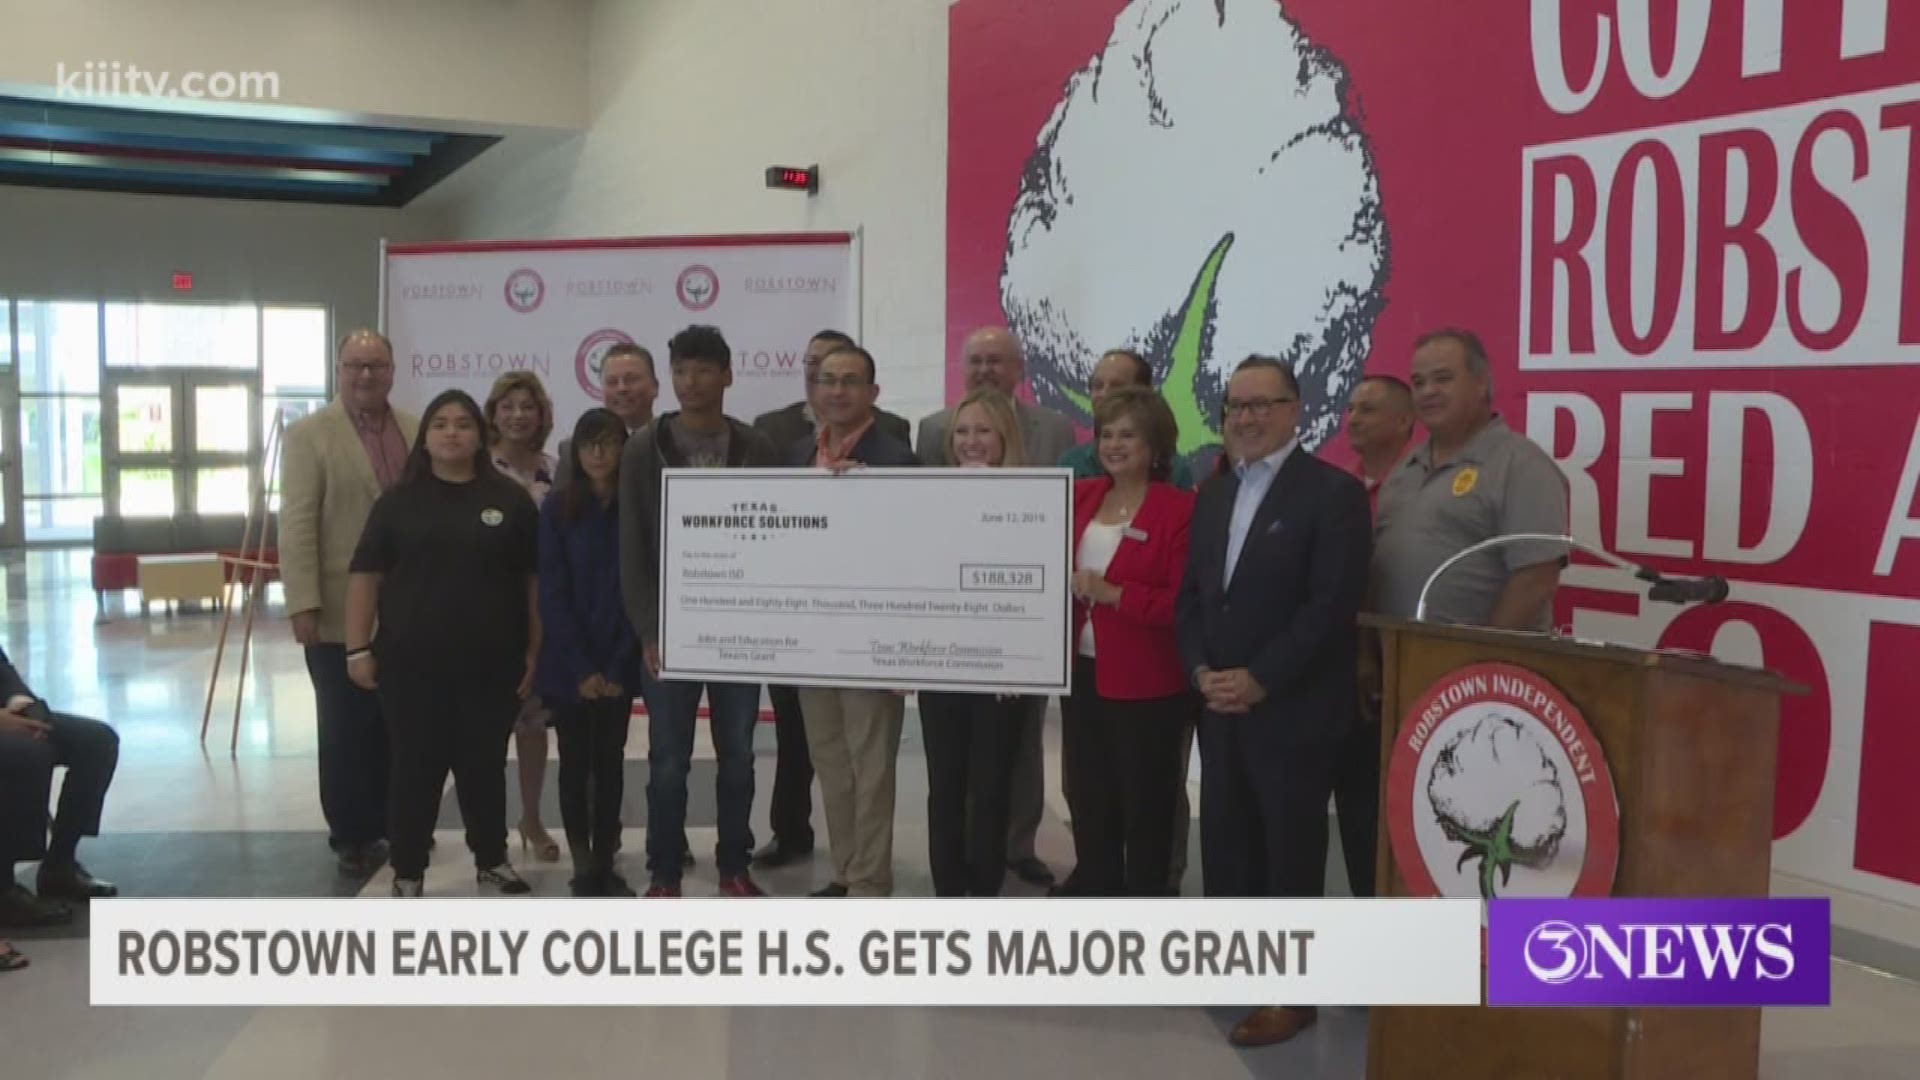 The Robstown Independent School District received quite the recognition Wednesday for their dual-credit programs.